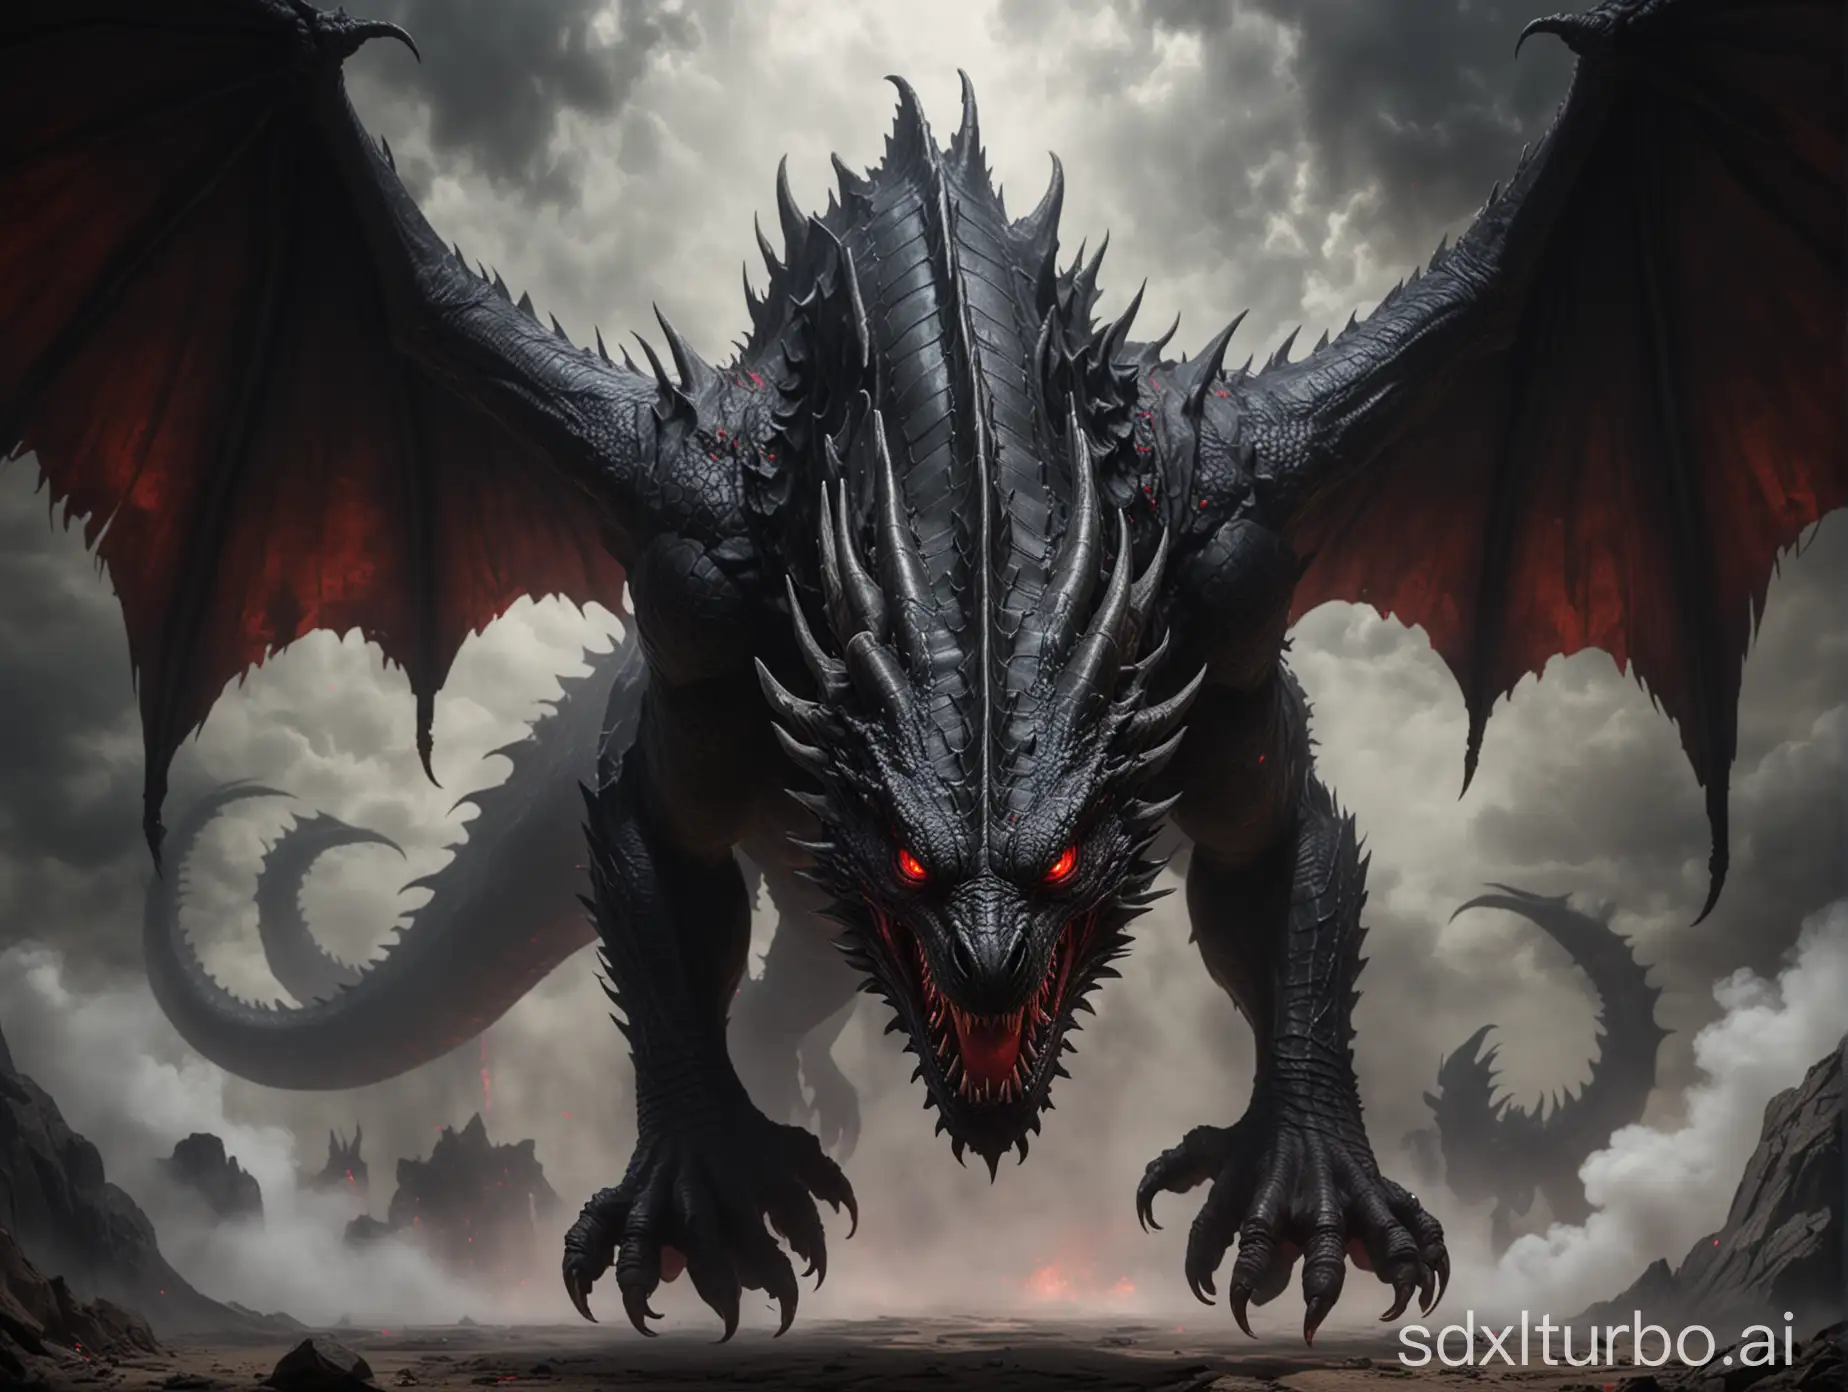 Sinister-Black-Dragon-Staring-Down-with-Fiery-Red-Eyes